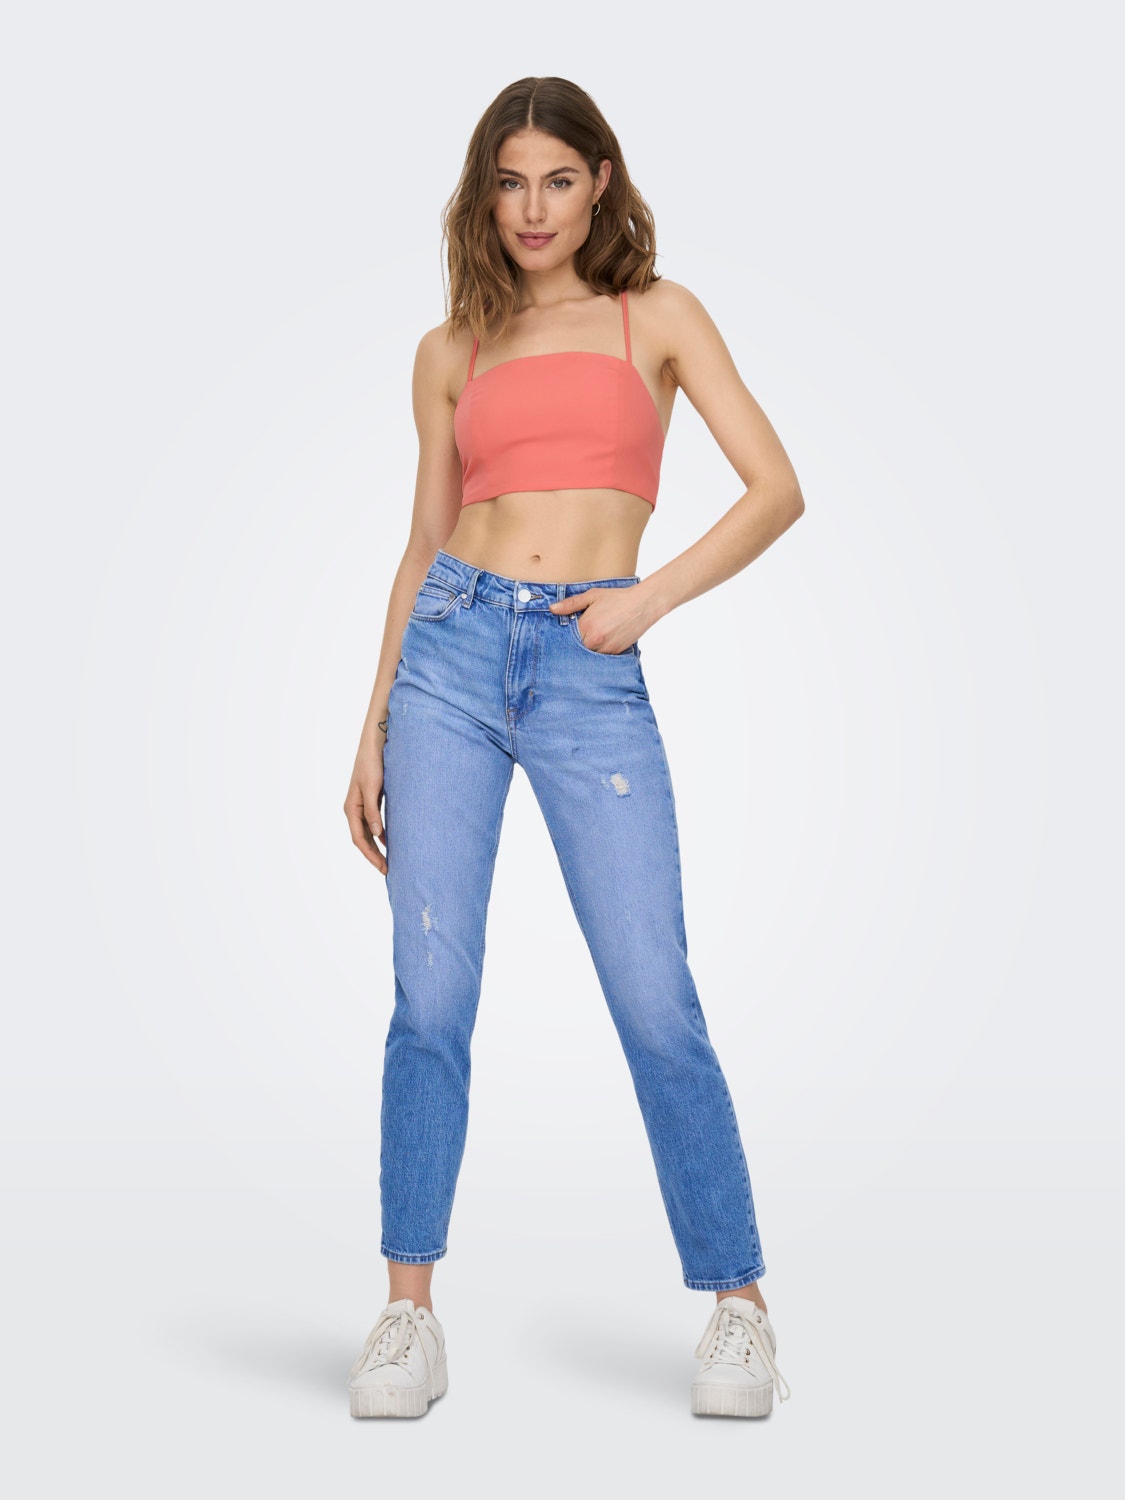 ONLY Cropped fit Off-shoulder Top -Georgia Peach - 15283899